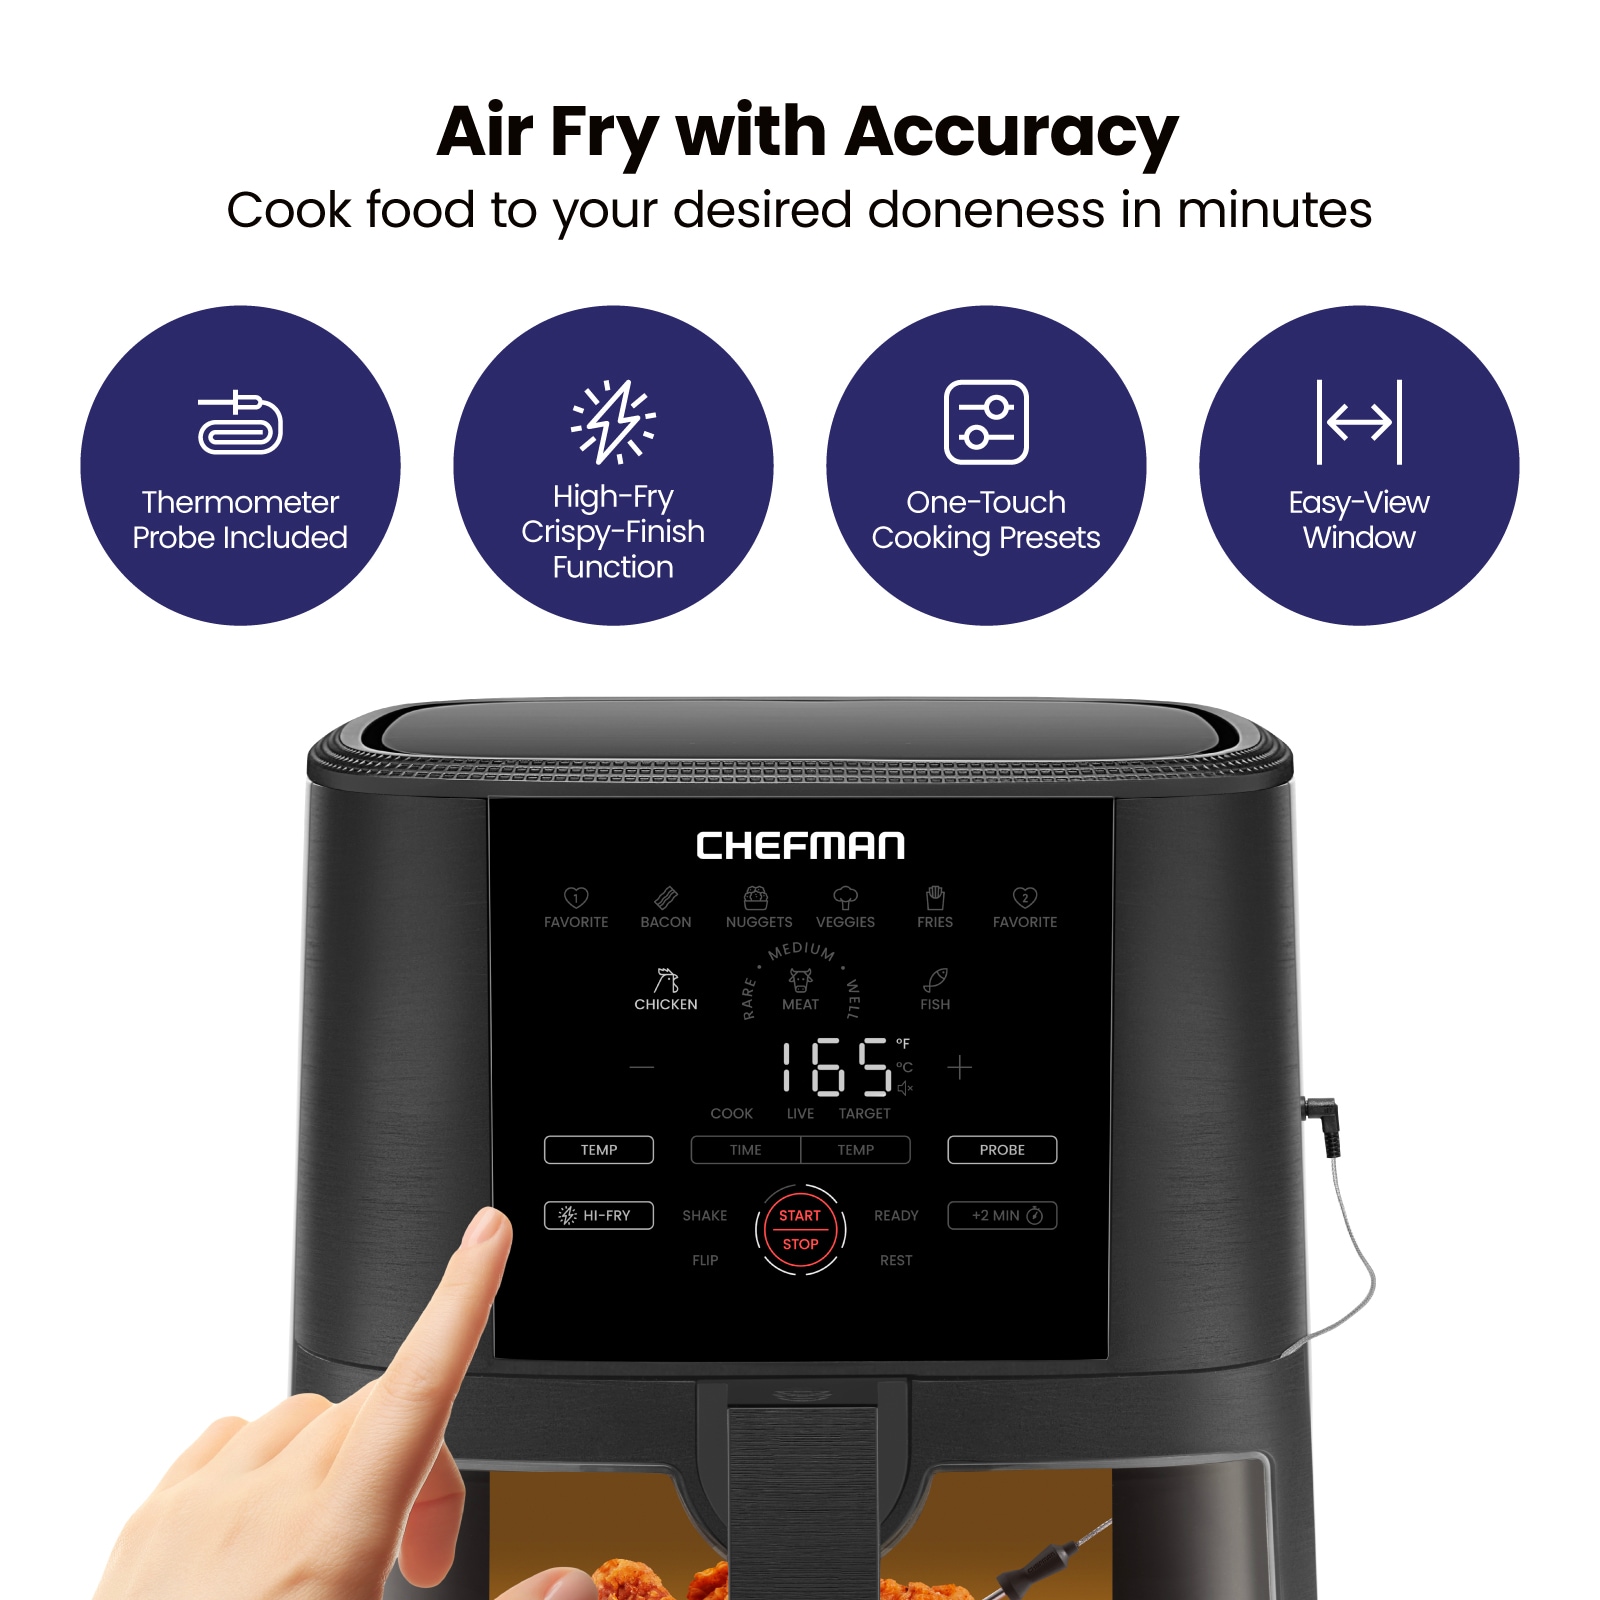 Chefman TurboFry Touch Digital Air Fryer, 5 Qt., Stainless Steel